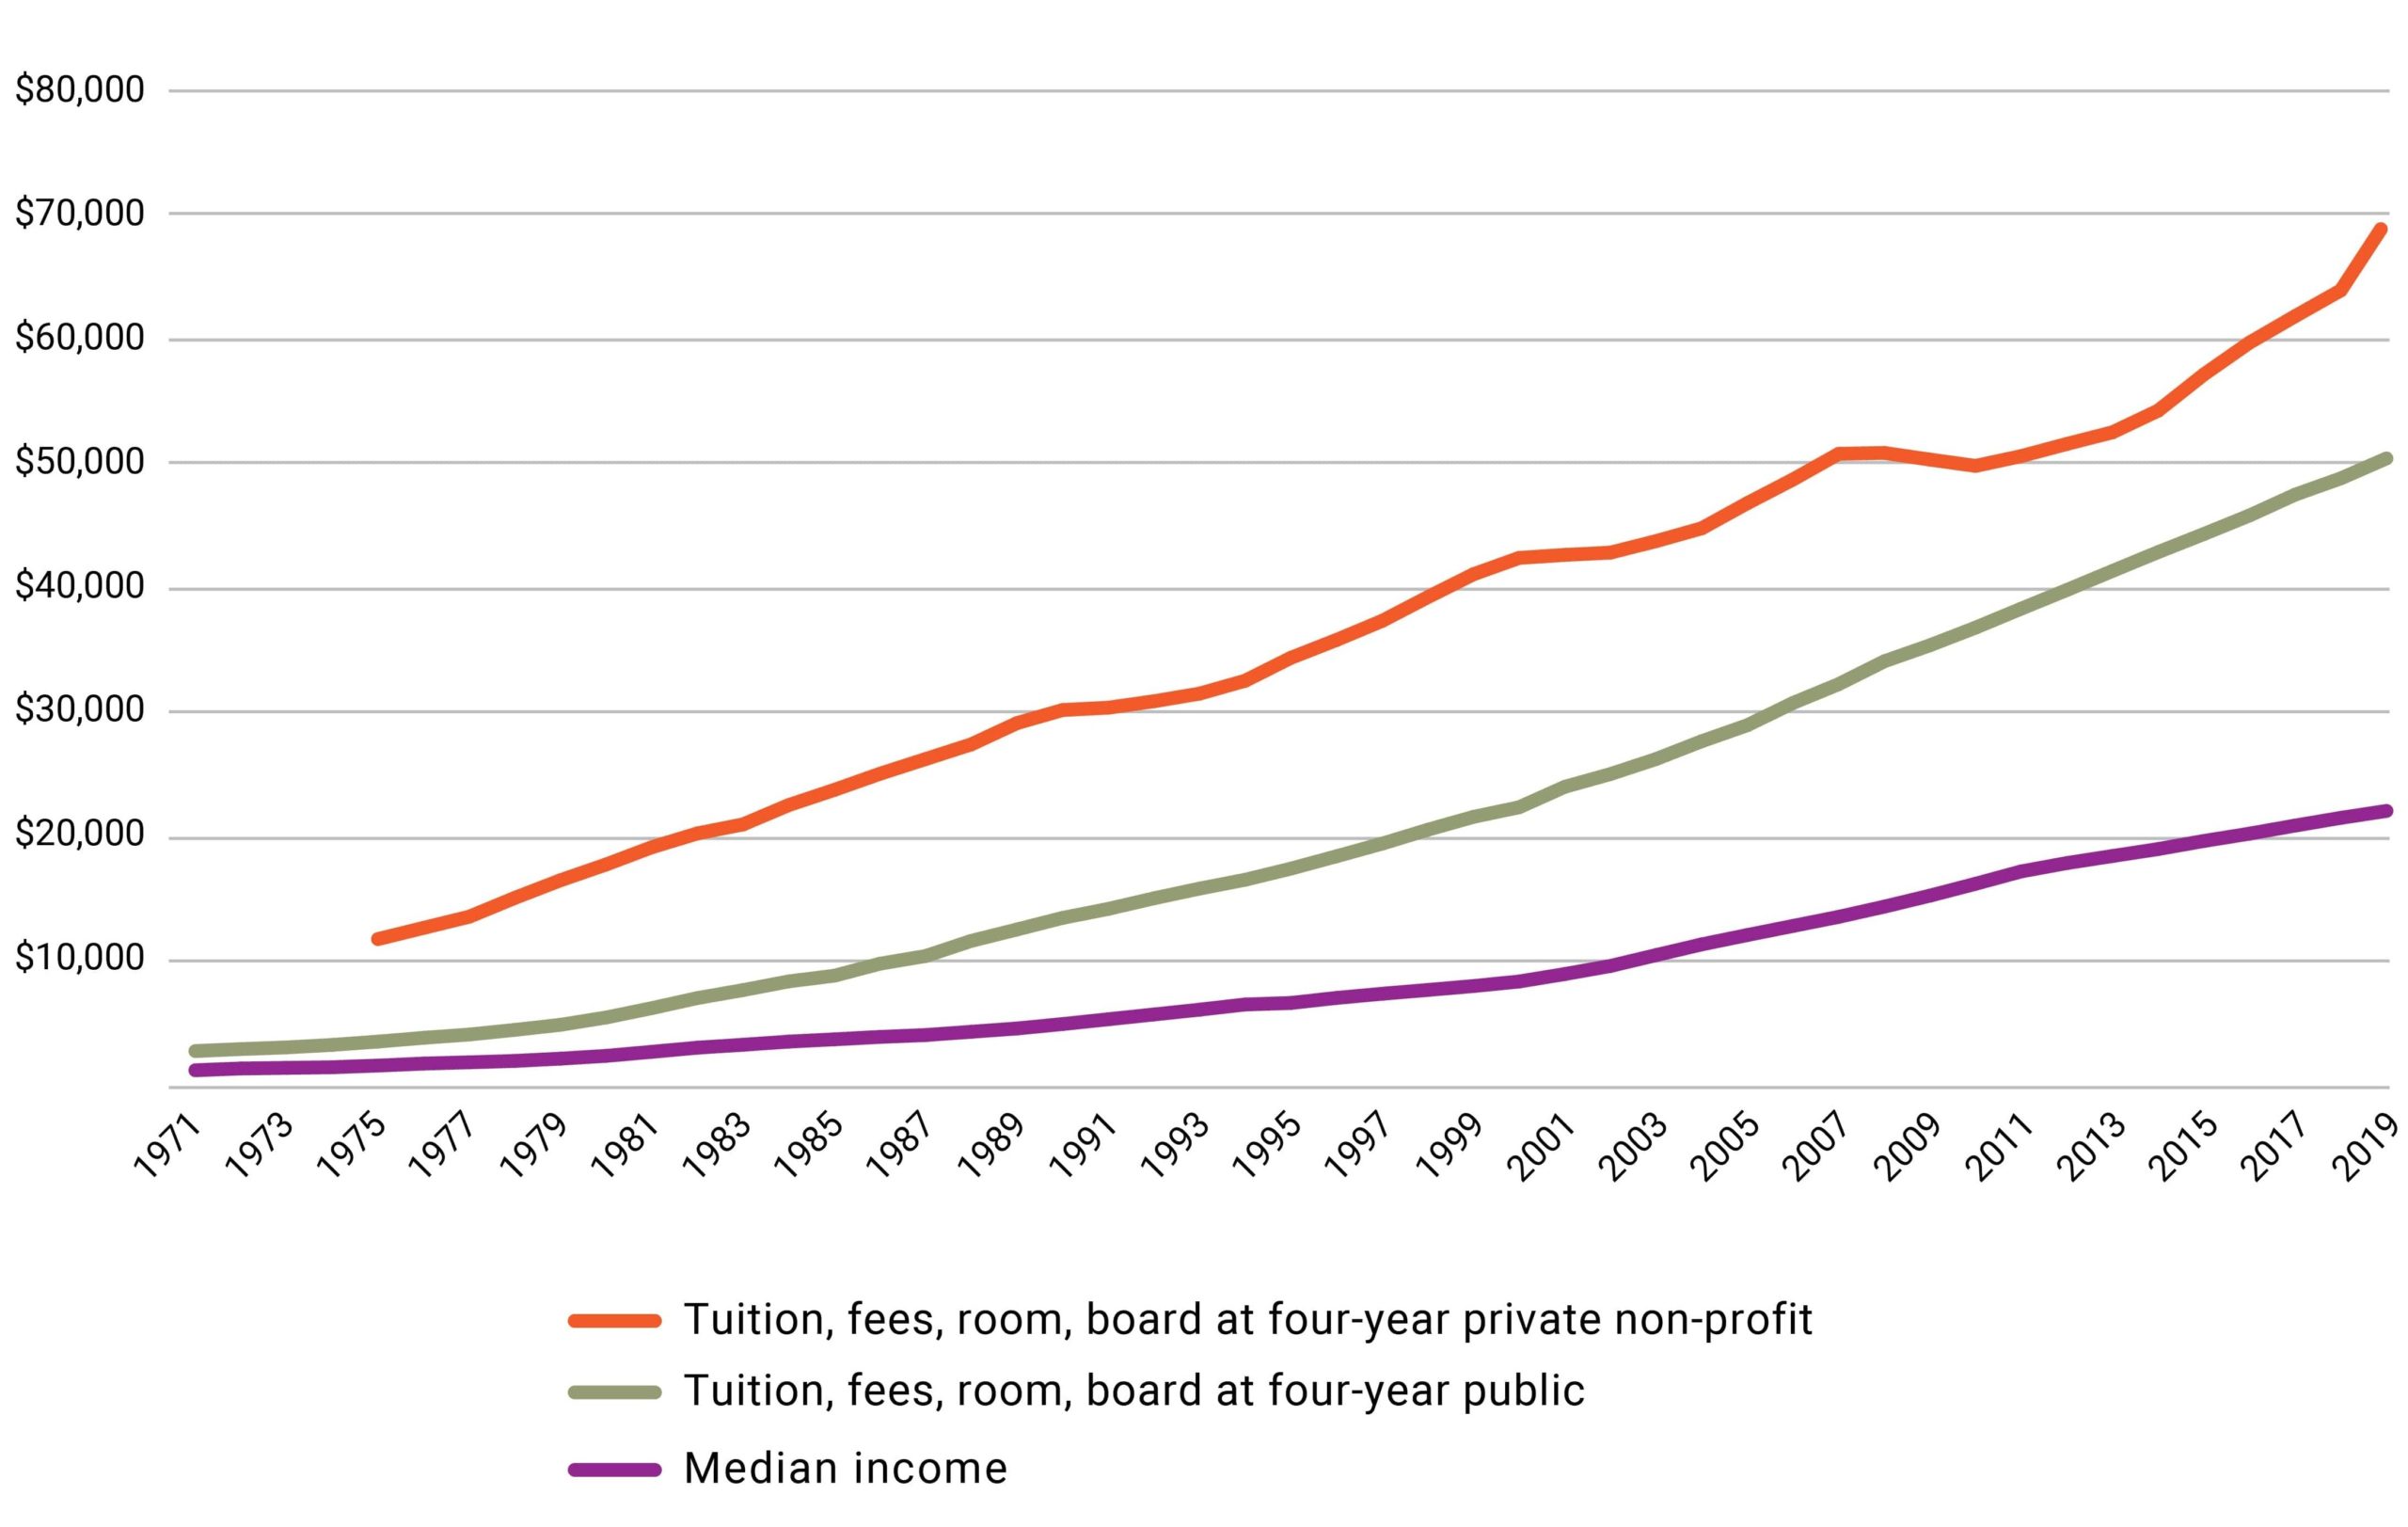 Figure 6. Price of Tuition, Fees, Room, and Board of Four-Year Colleges vs. Pre-Tax Median Household Income in Nominal Dollars, 1971/72-2019/20